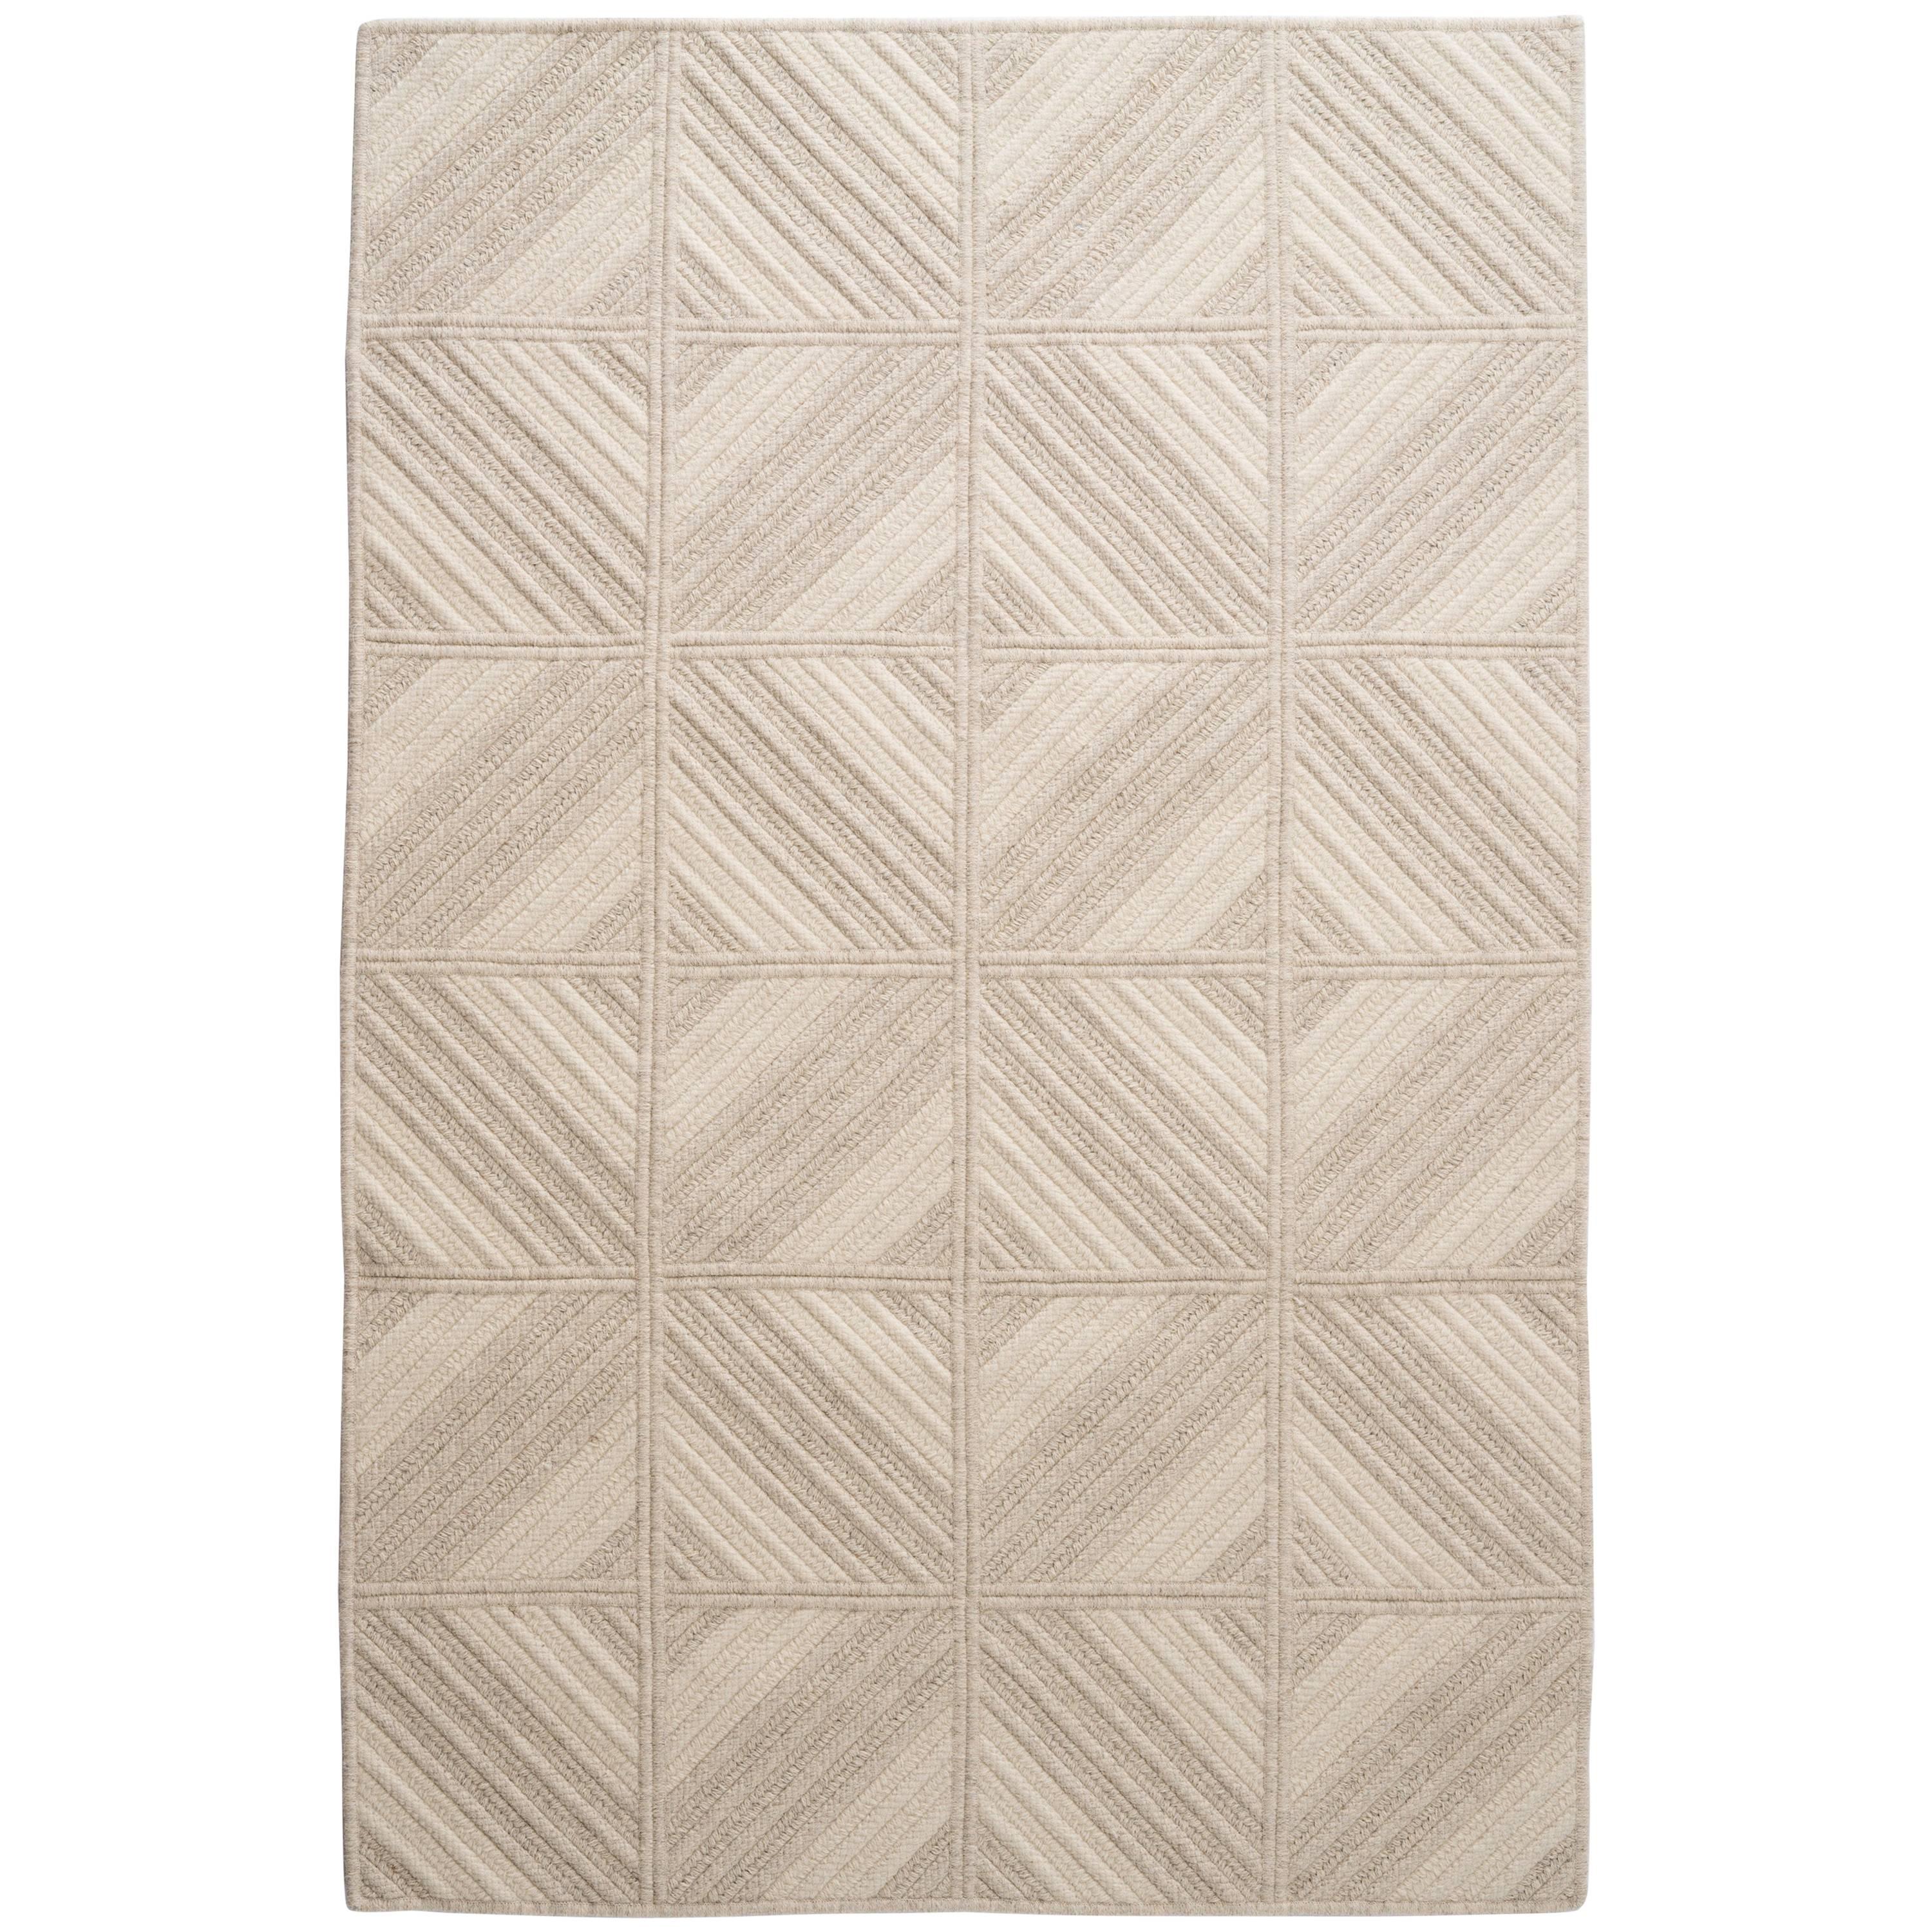 Araz Rug, Natural Woven Light Grey and Cream Wool, Custom Made in USA For Sale